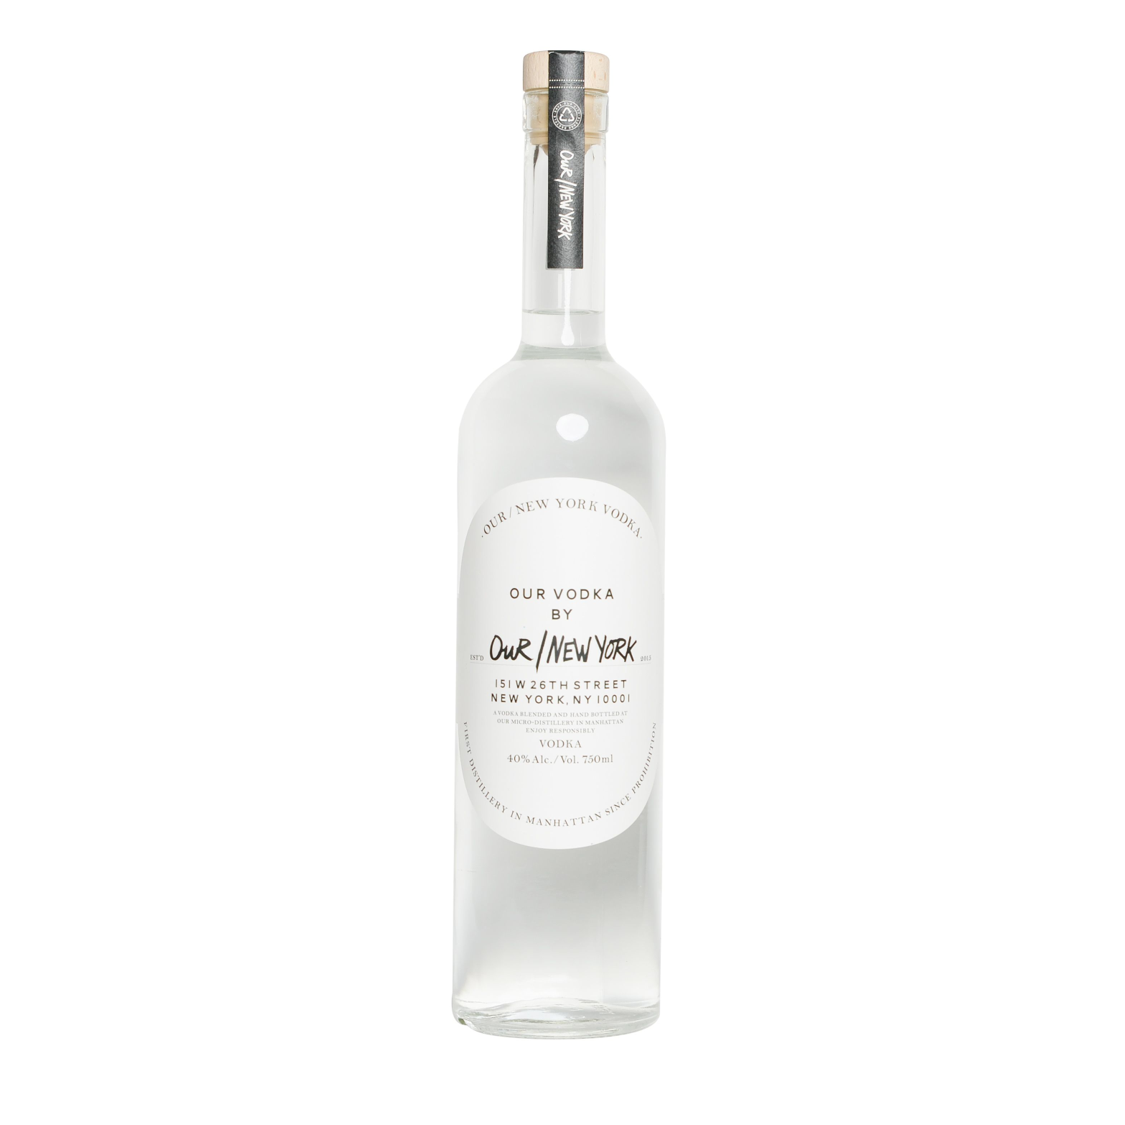 Our/New York Vodka, $29